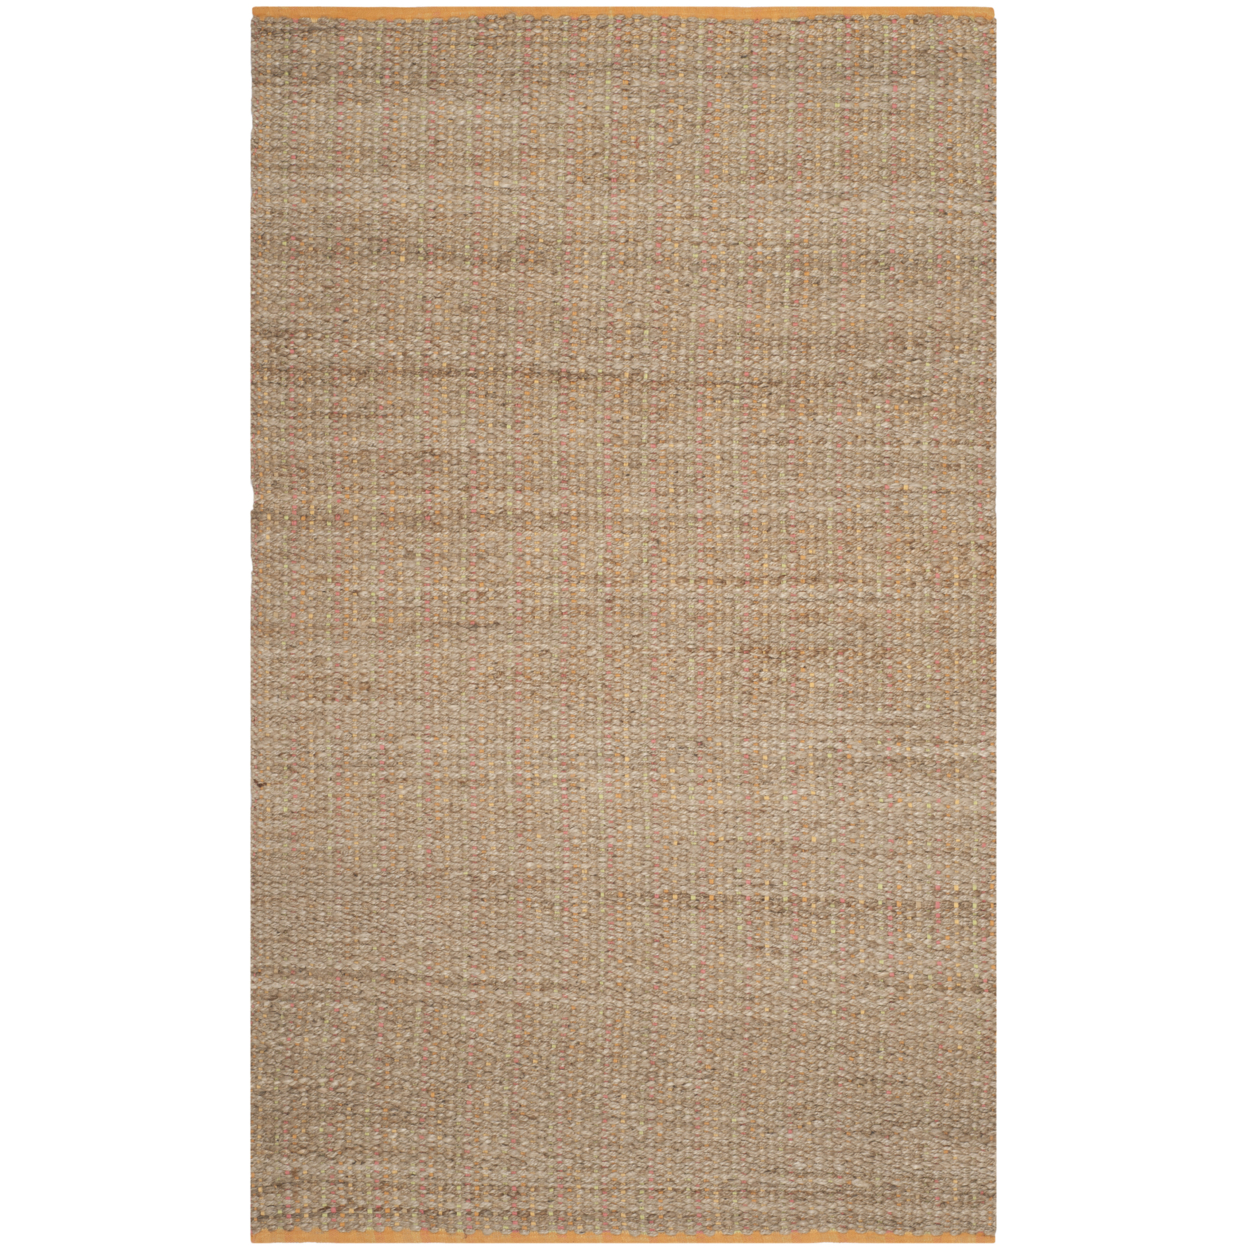 SAFAVIEH Cape Cod Collection CAP811D Handwoven Spring Rug - 5' X 8'